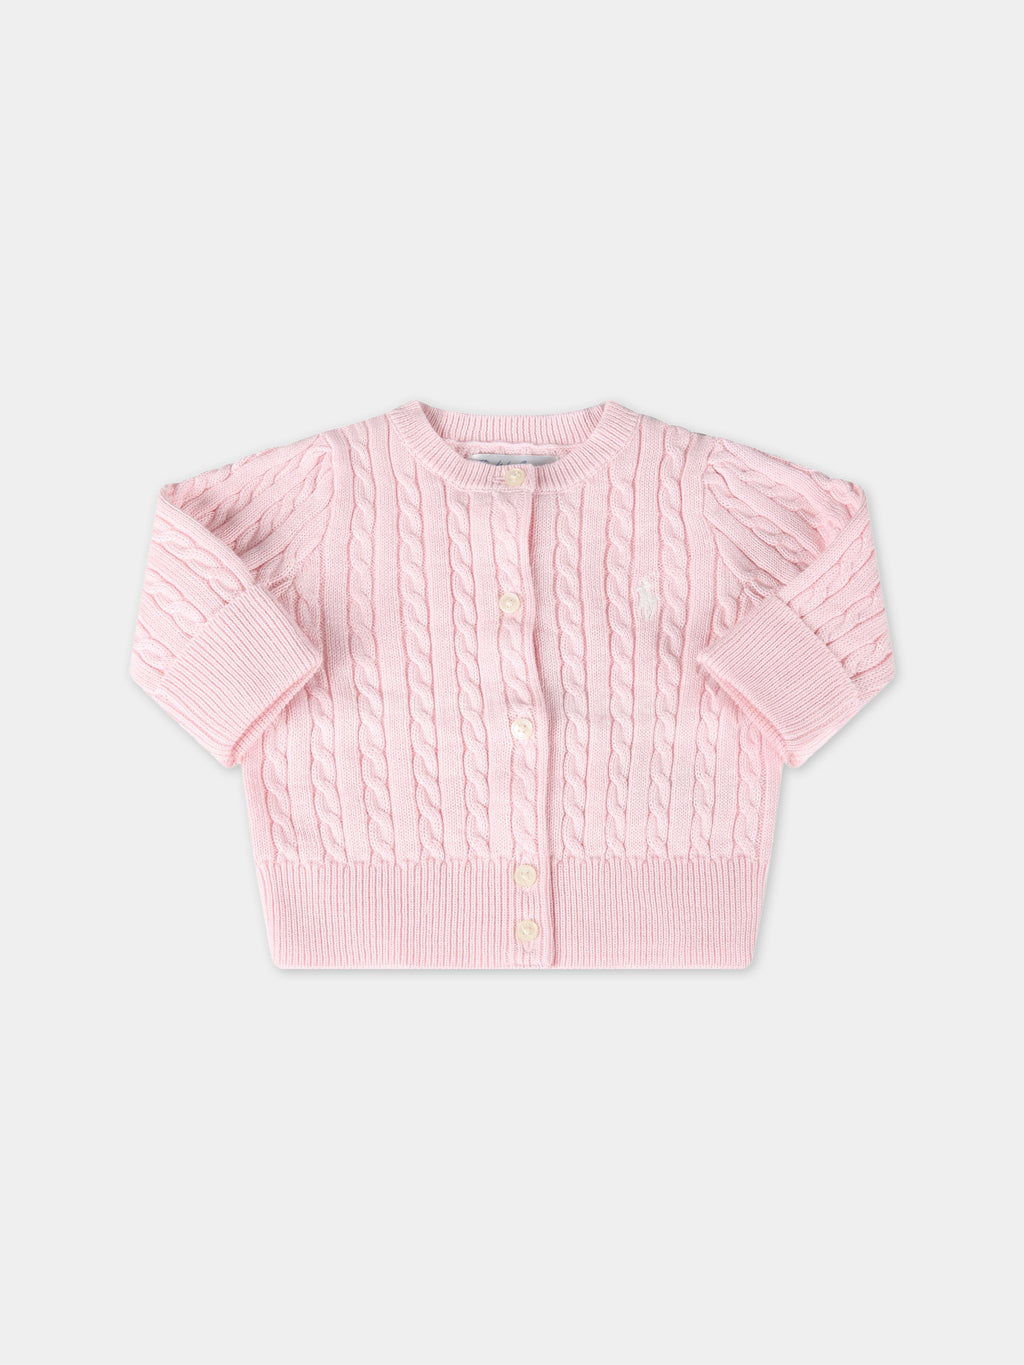 Pink cardigan for babygirl with iconic pony